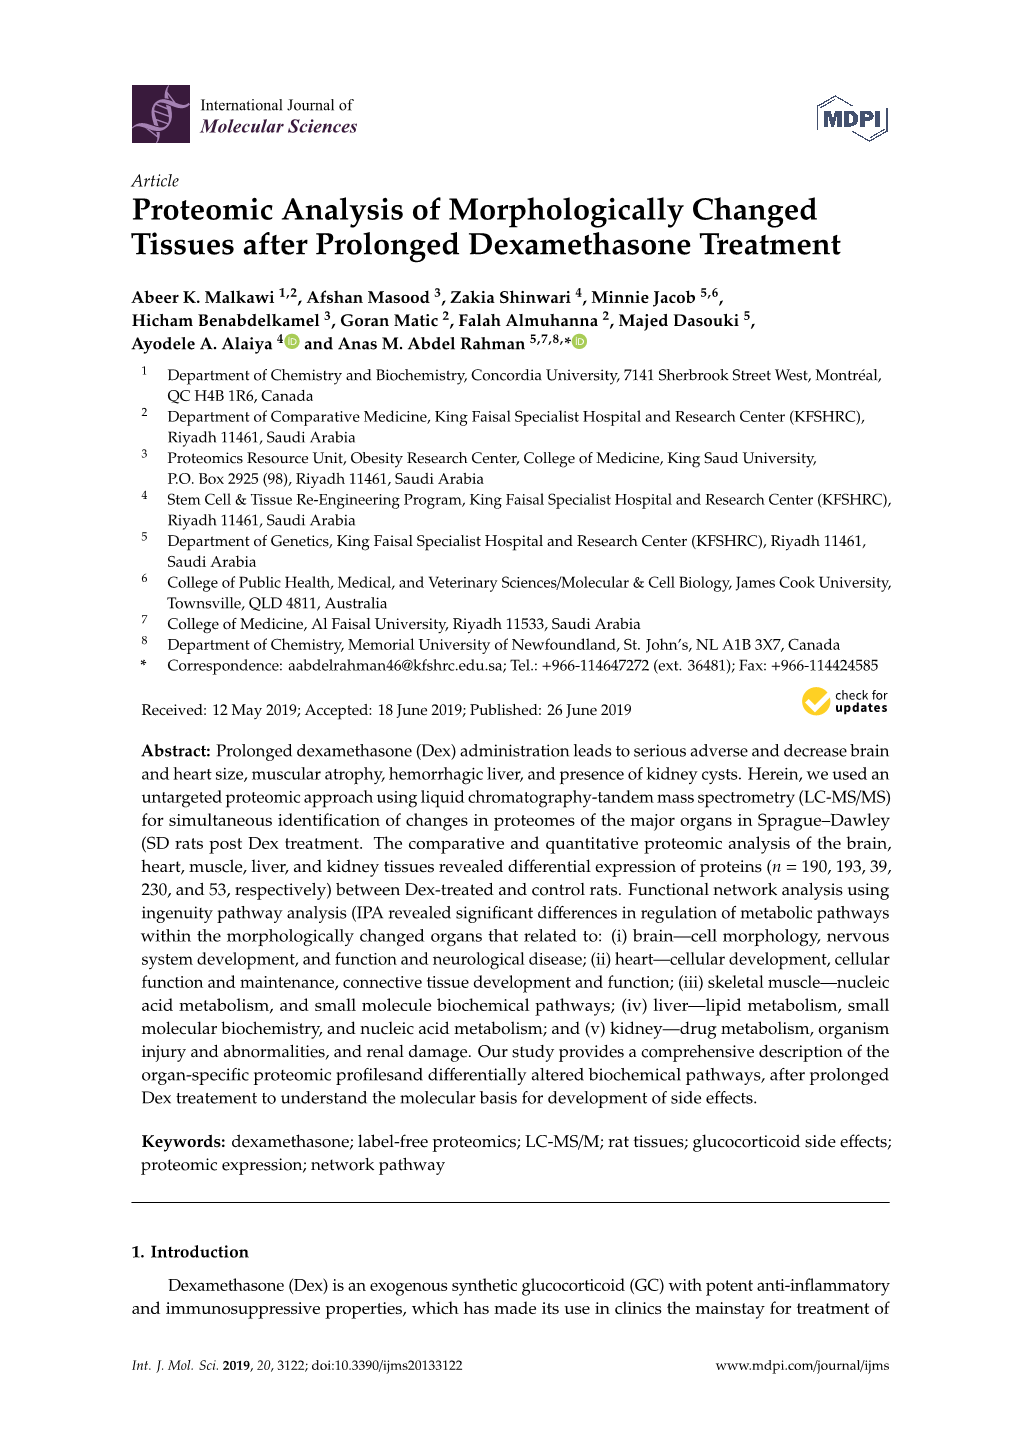 Proteomic Analysis of Morphologically Changed Tissues After Prolonged Dexamethasone Treatment